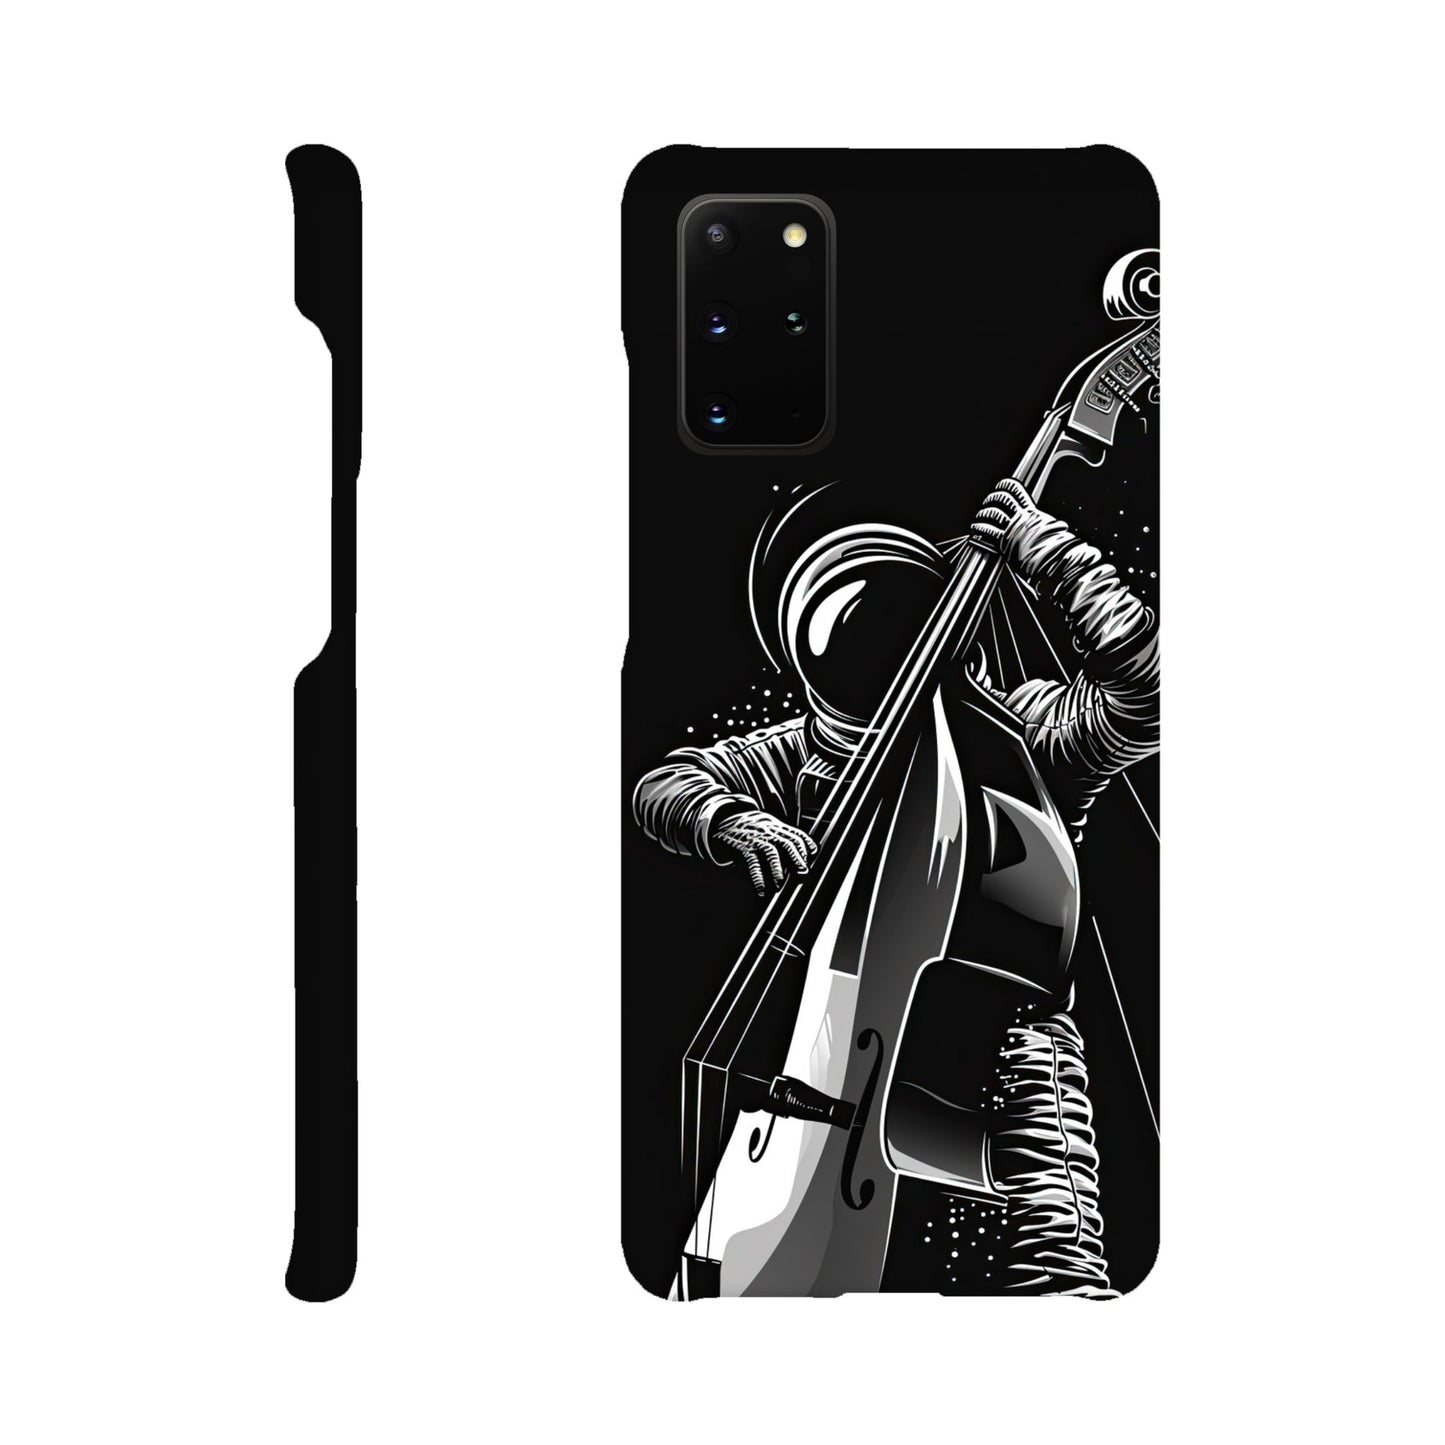 Galactic Groove: Slim Phone Case with Double Bass Spaceman Jazz